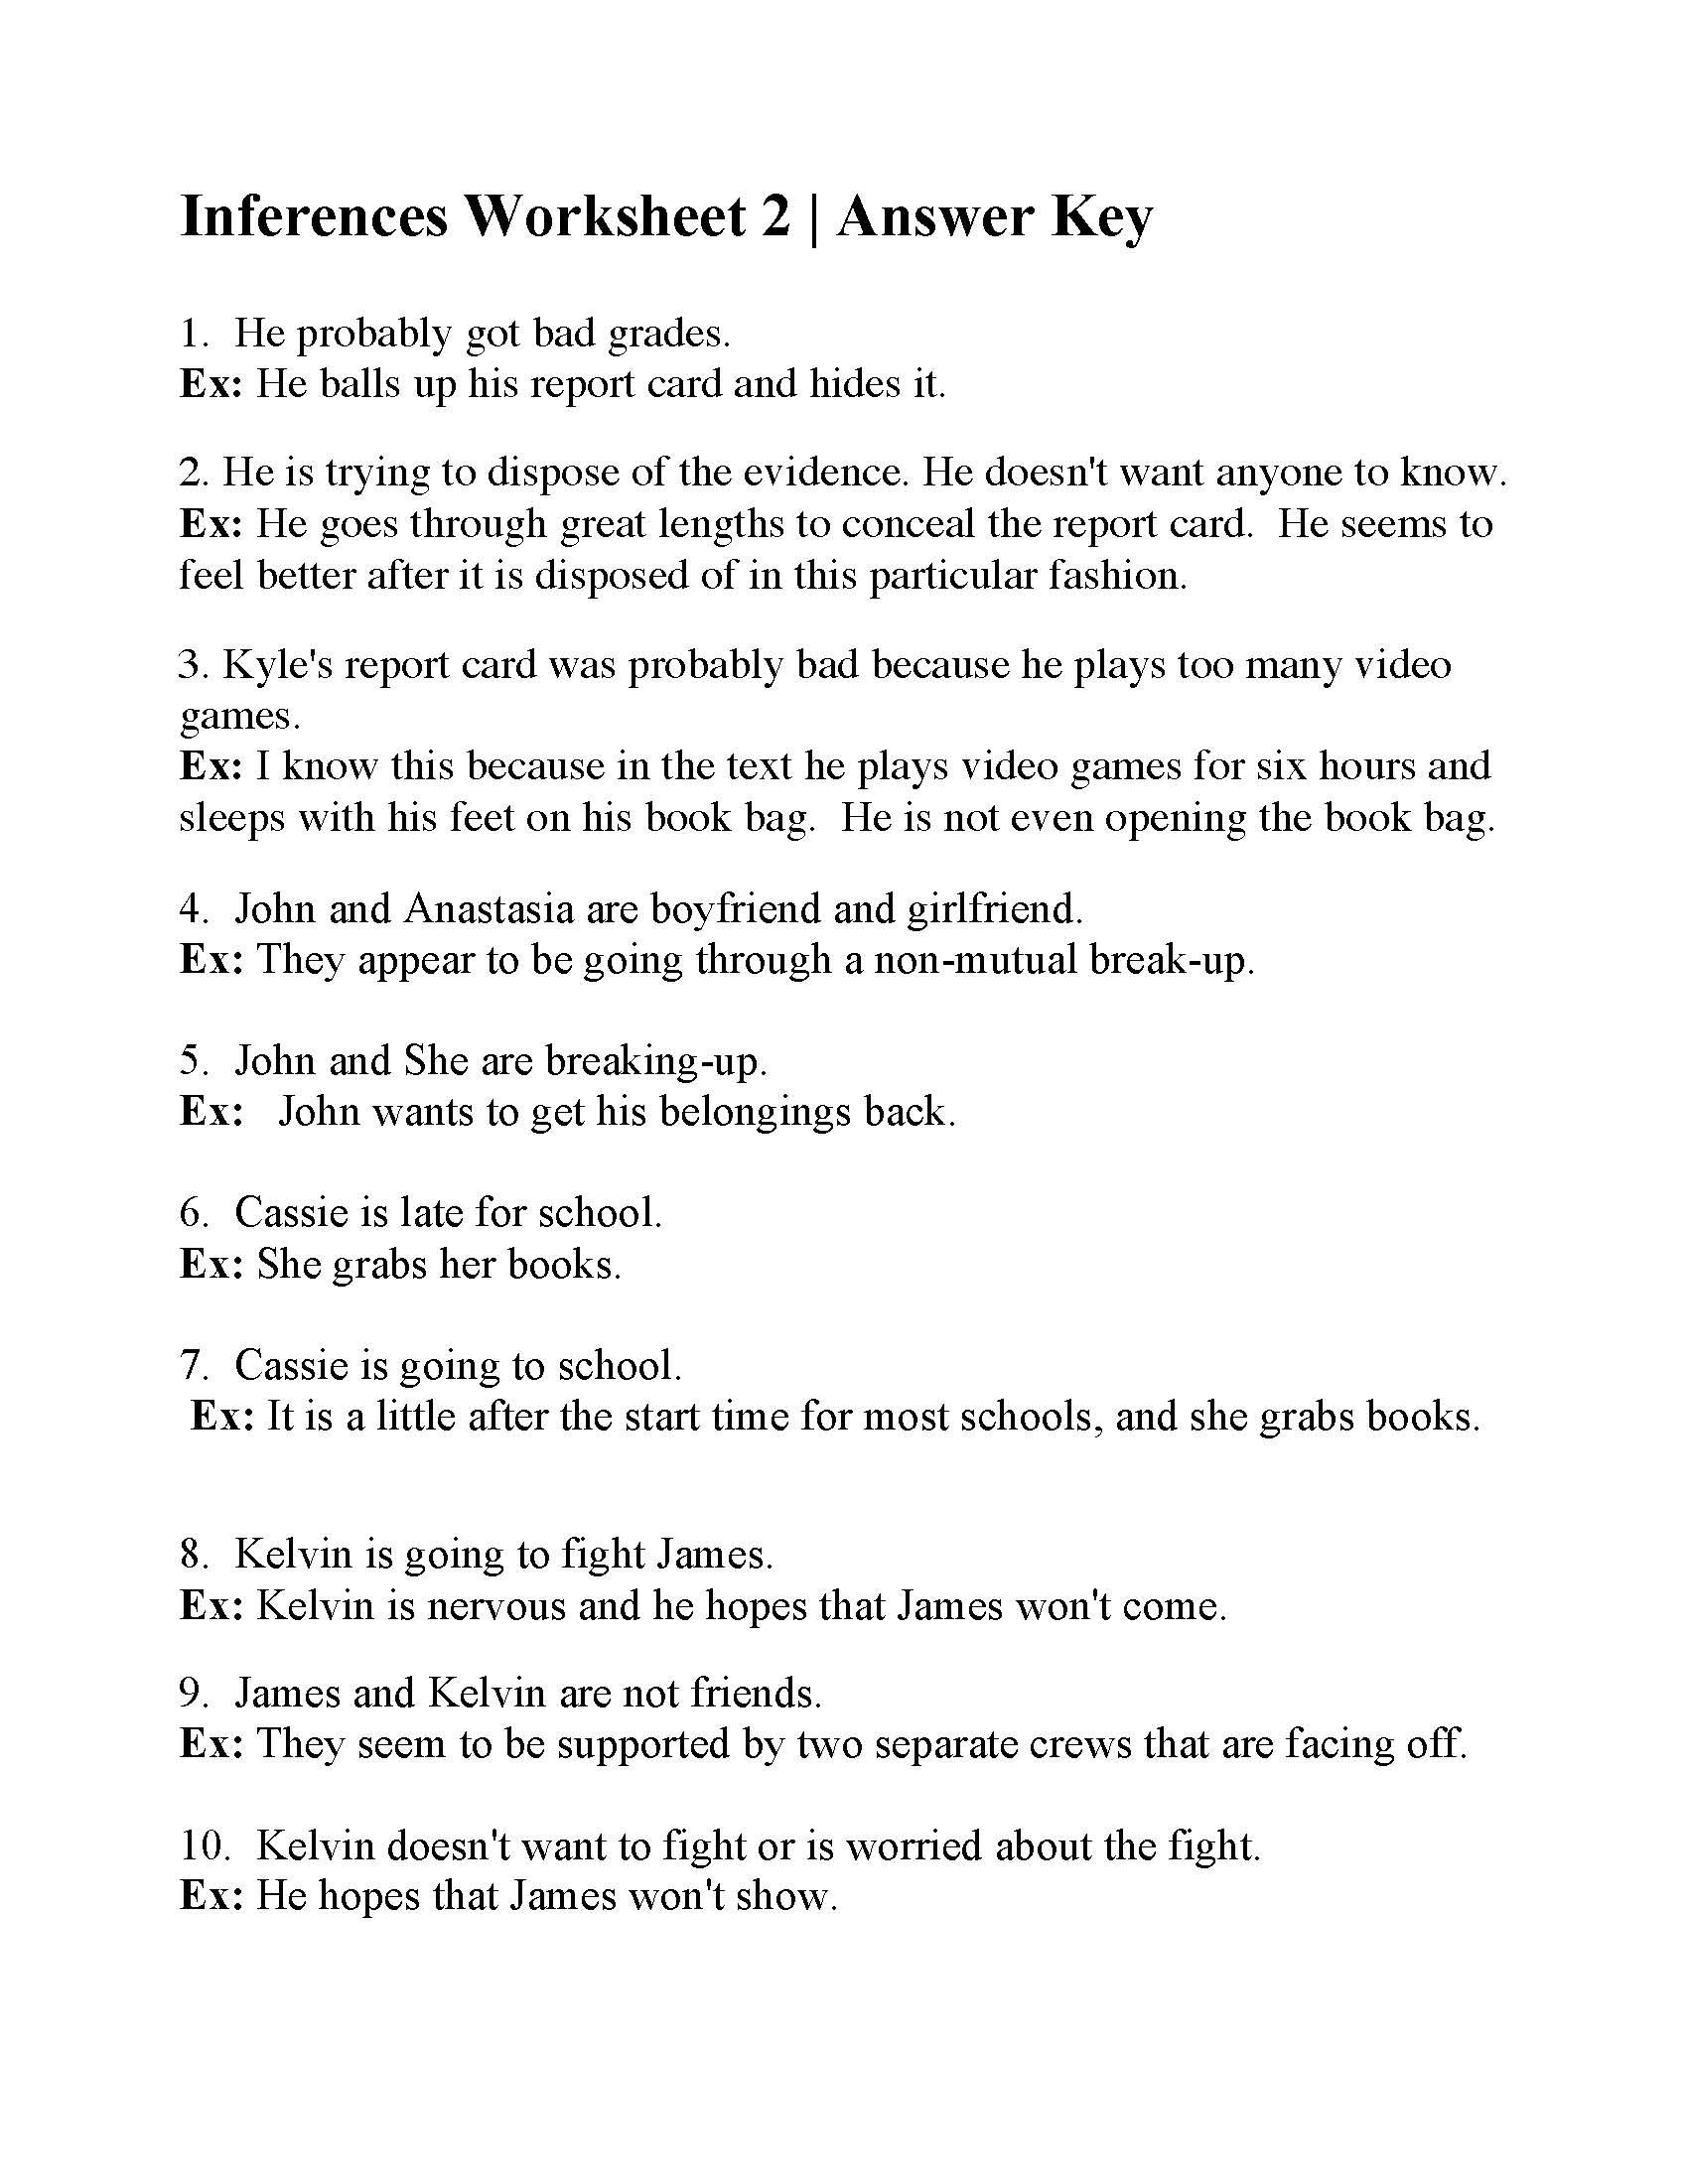 Inferences Worksheet 2  Answers Within Inferences Worksheet 2